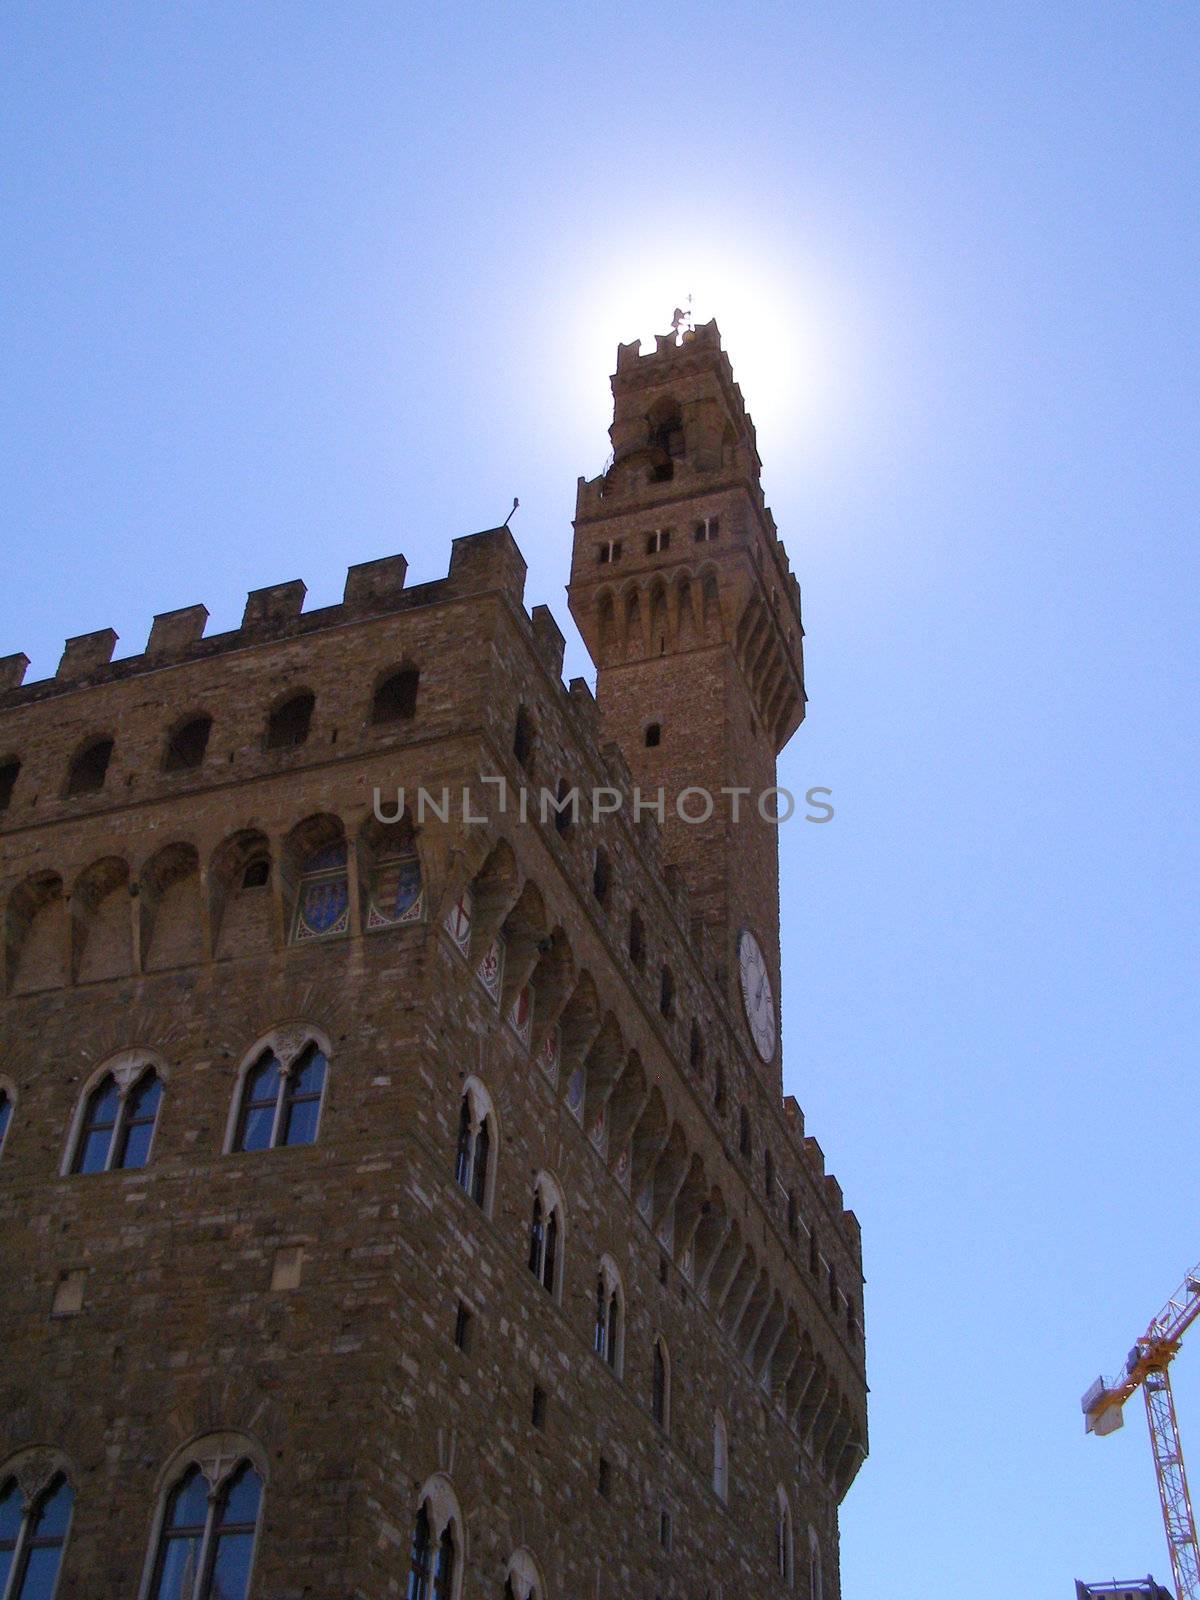 Florence by paolo77